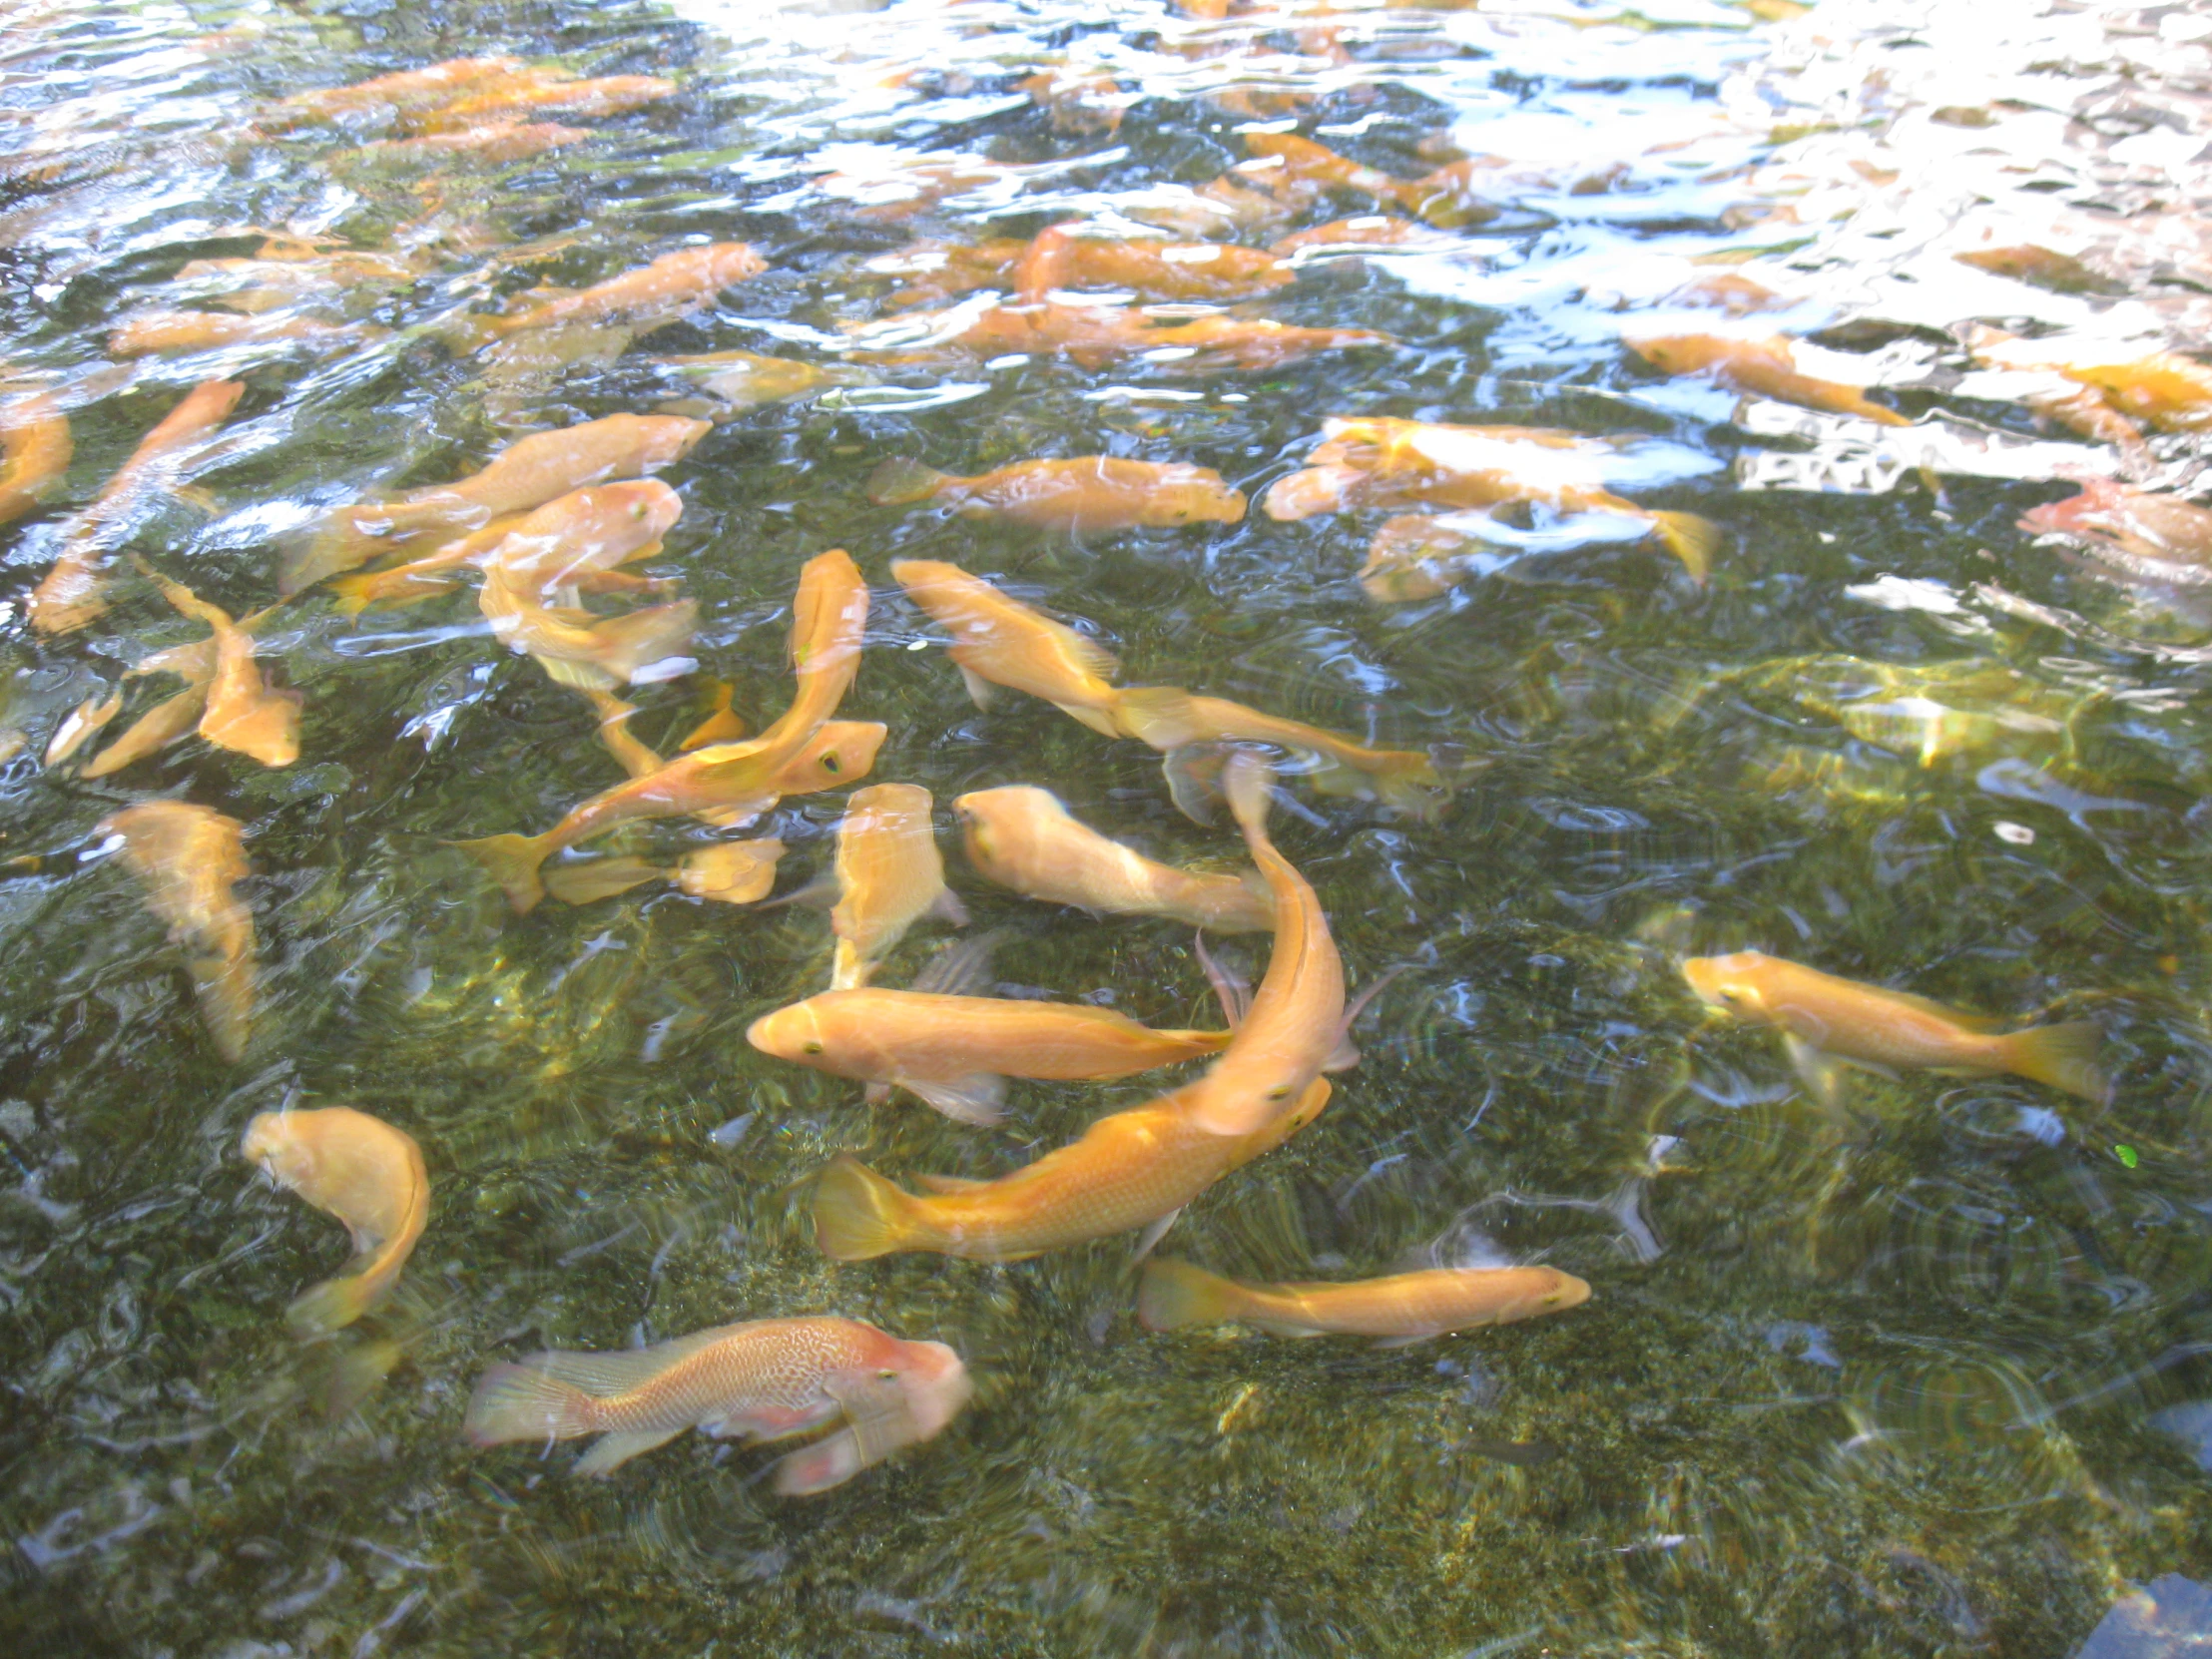 small group of yellow fish swimming in water